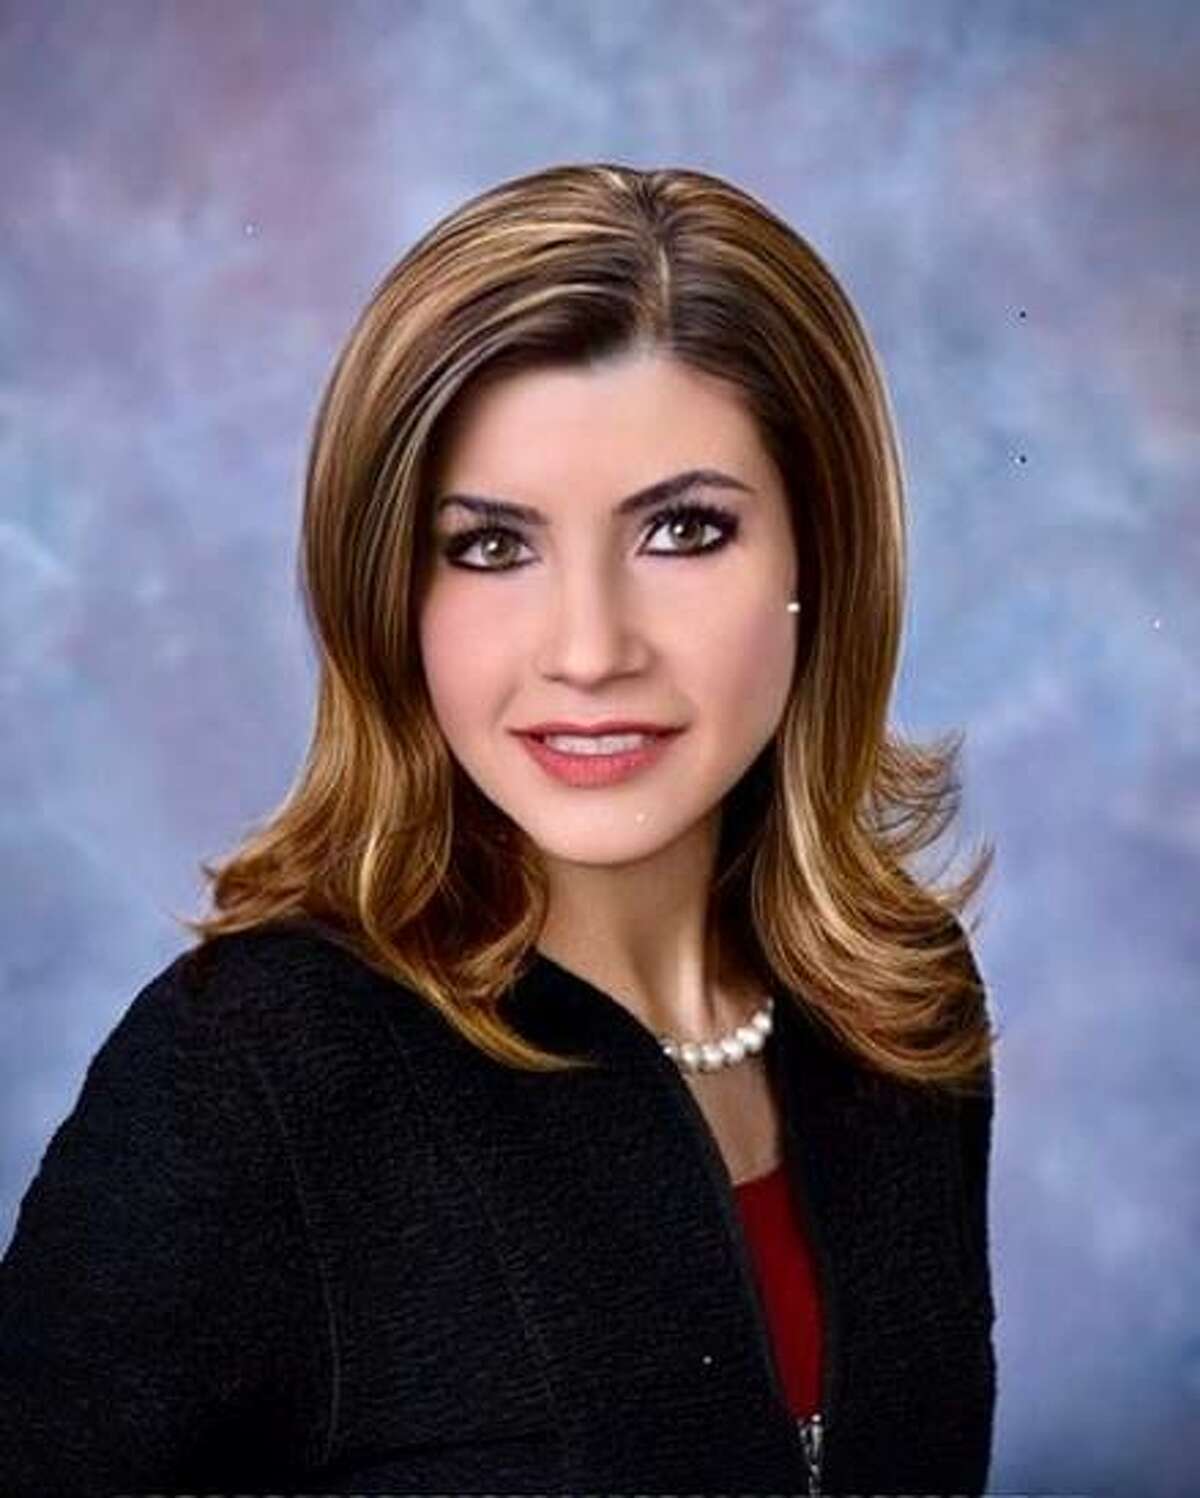 Kristina Hale is a native Laredoan. She earned a Bachelor of Science from St. Mary’s University in 1994. She studied law at Texas Southern University School of Law and became a licensed attorney in 1997.